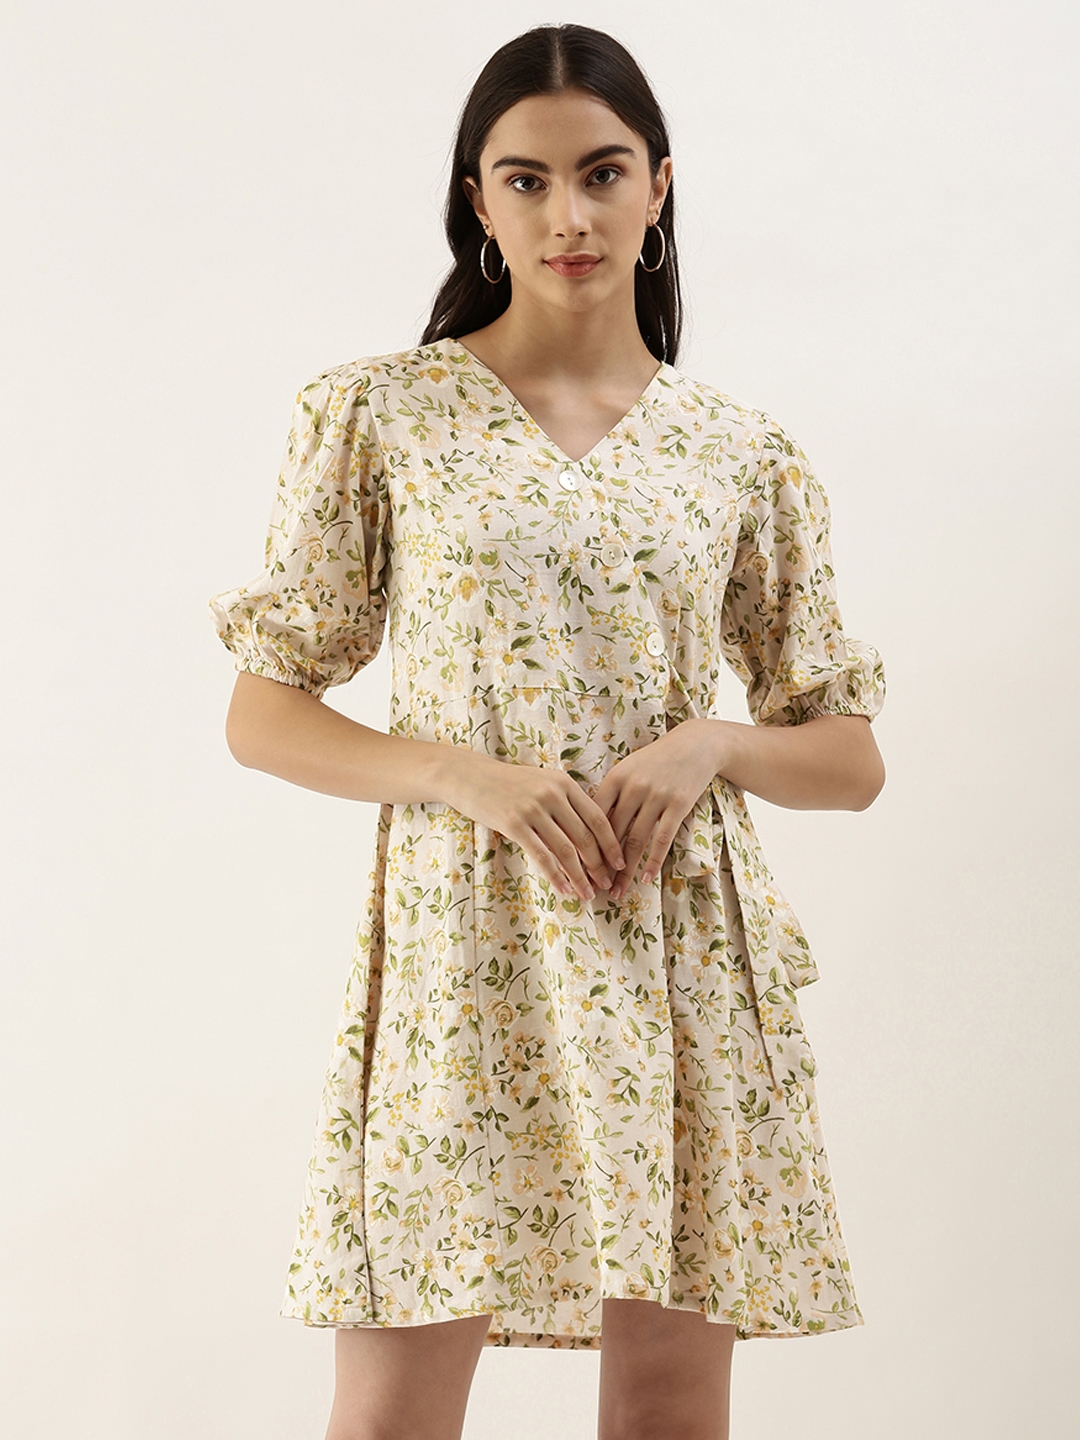 AND Beige & Multicoloured Floral Printed Casual Fit N Flare Dress